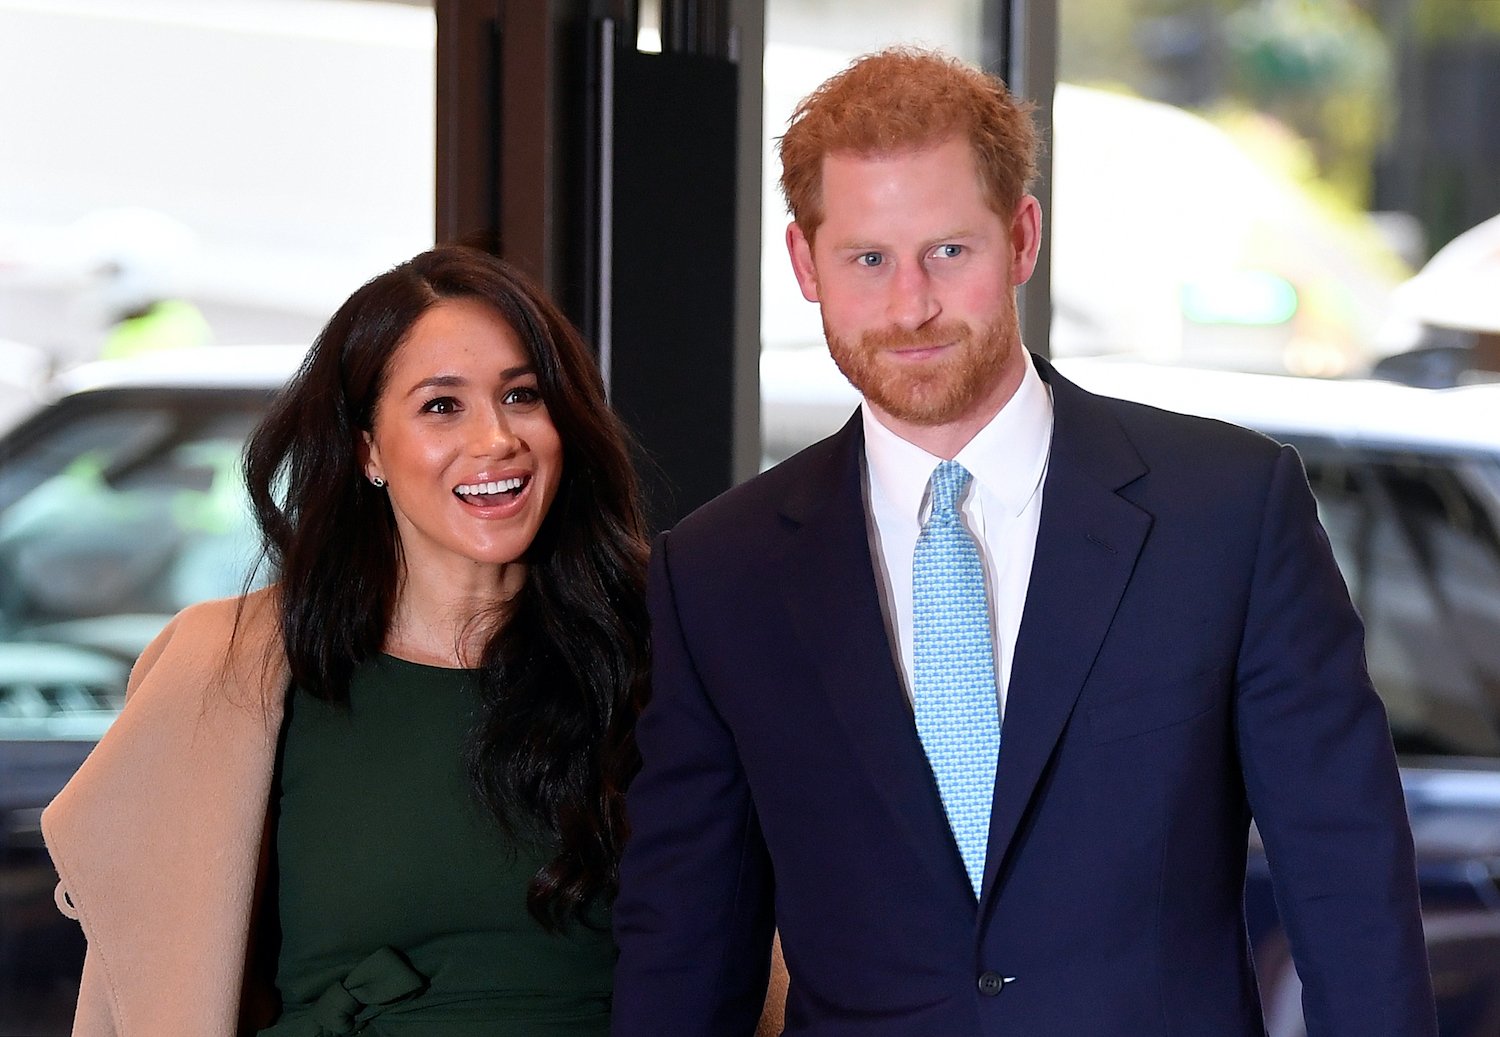 Meghan Markle and Prince Harry smile as they walk together, with Meghan wearing a green dress and brown coat and Prince Harry wearing a blue suit and tie at WellChild Awards